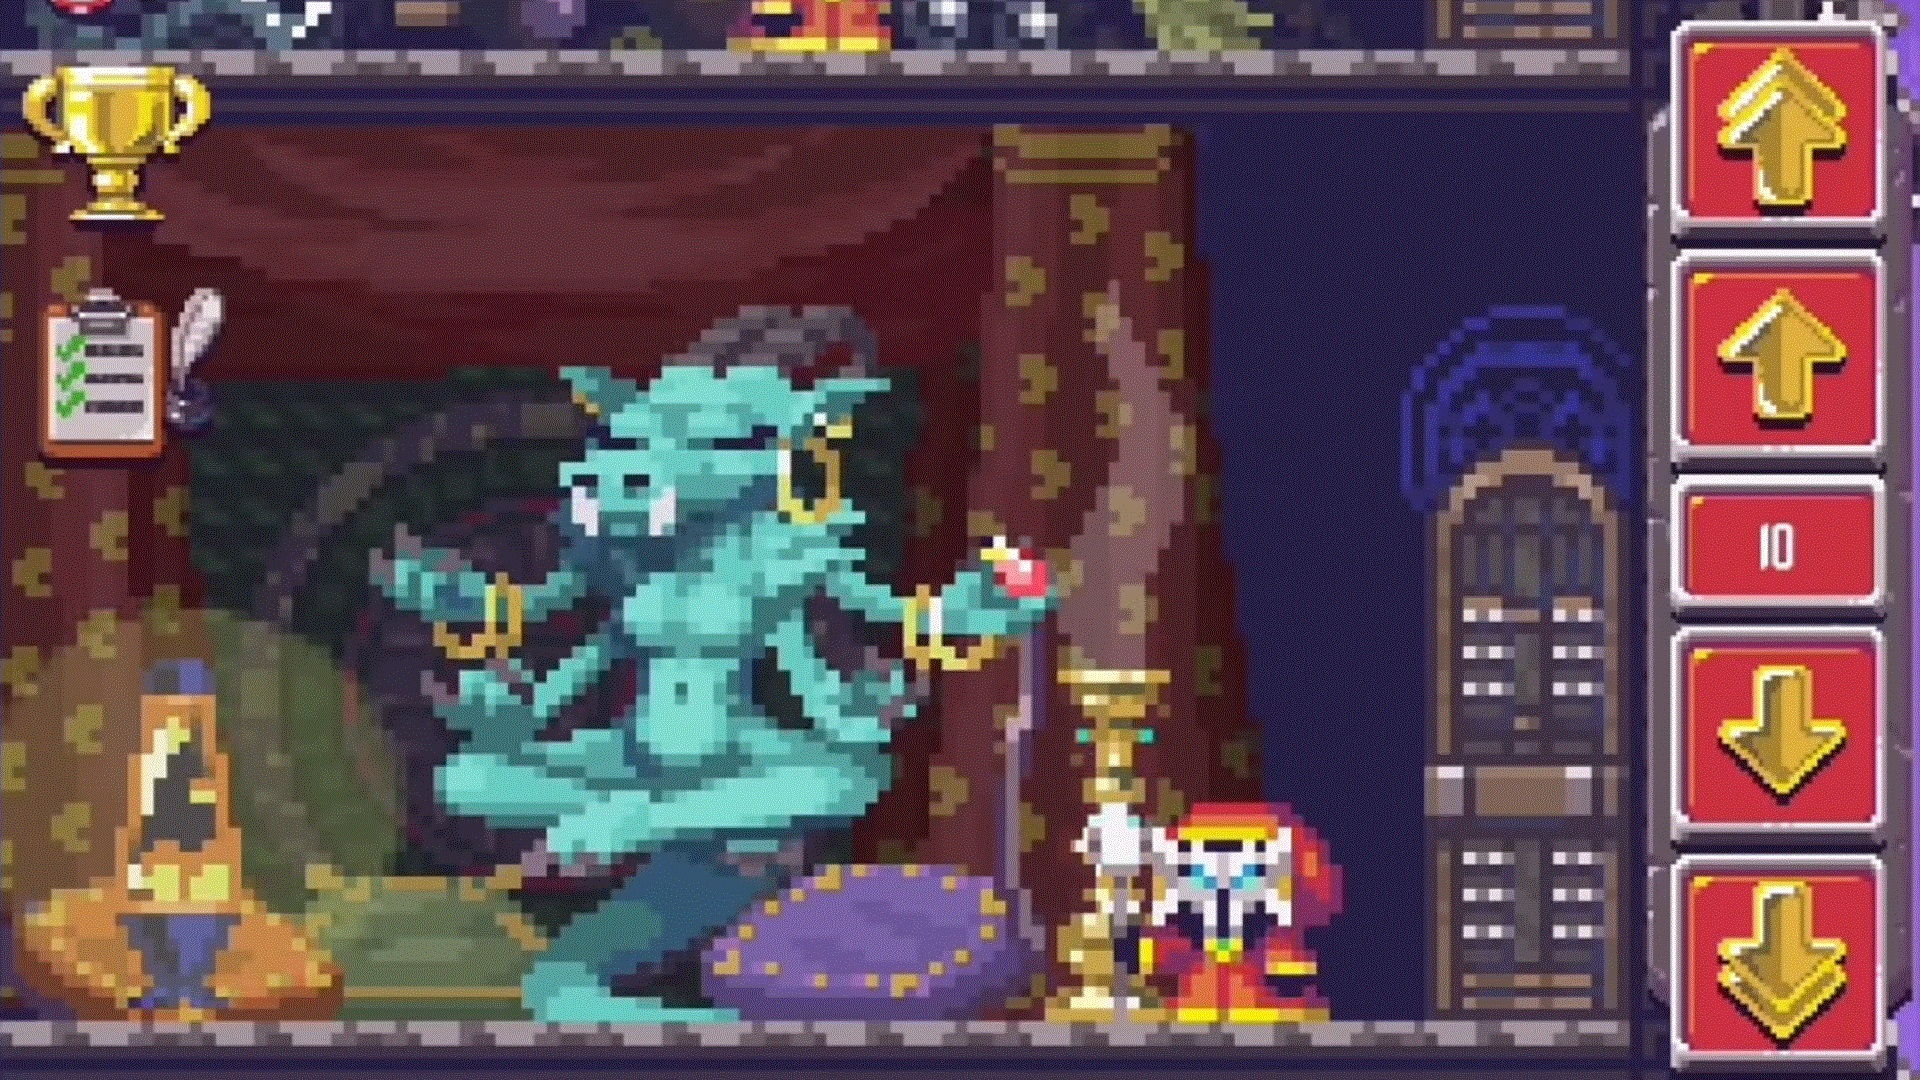 Best idle games: Idle Apocalypse. Image shows a many armed creature with a goat's head meditating in a palace.